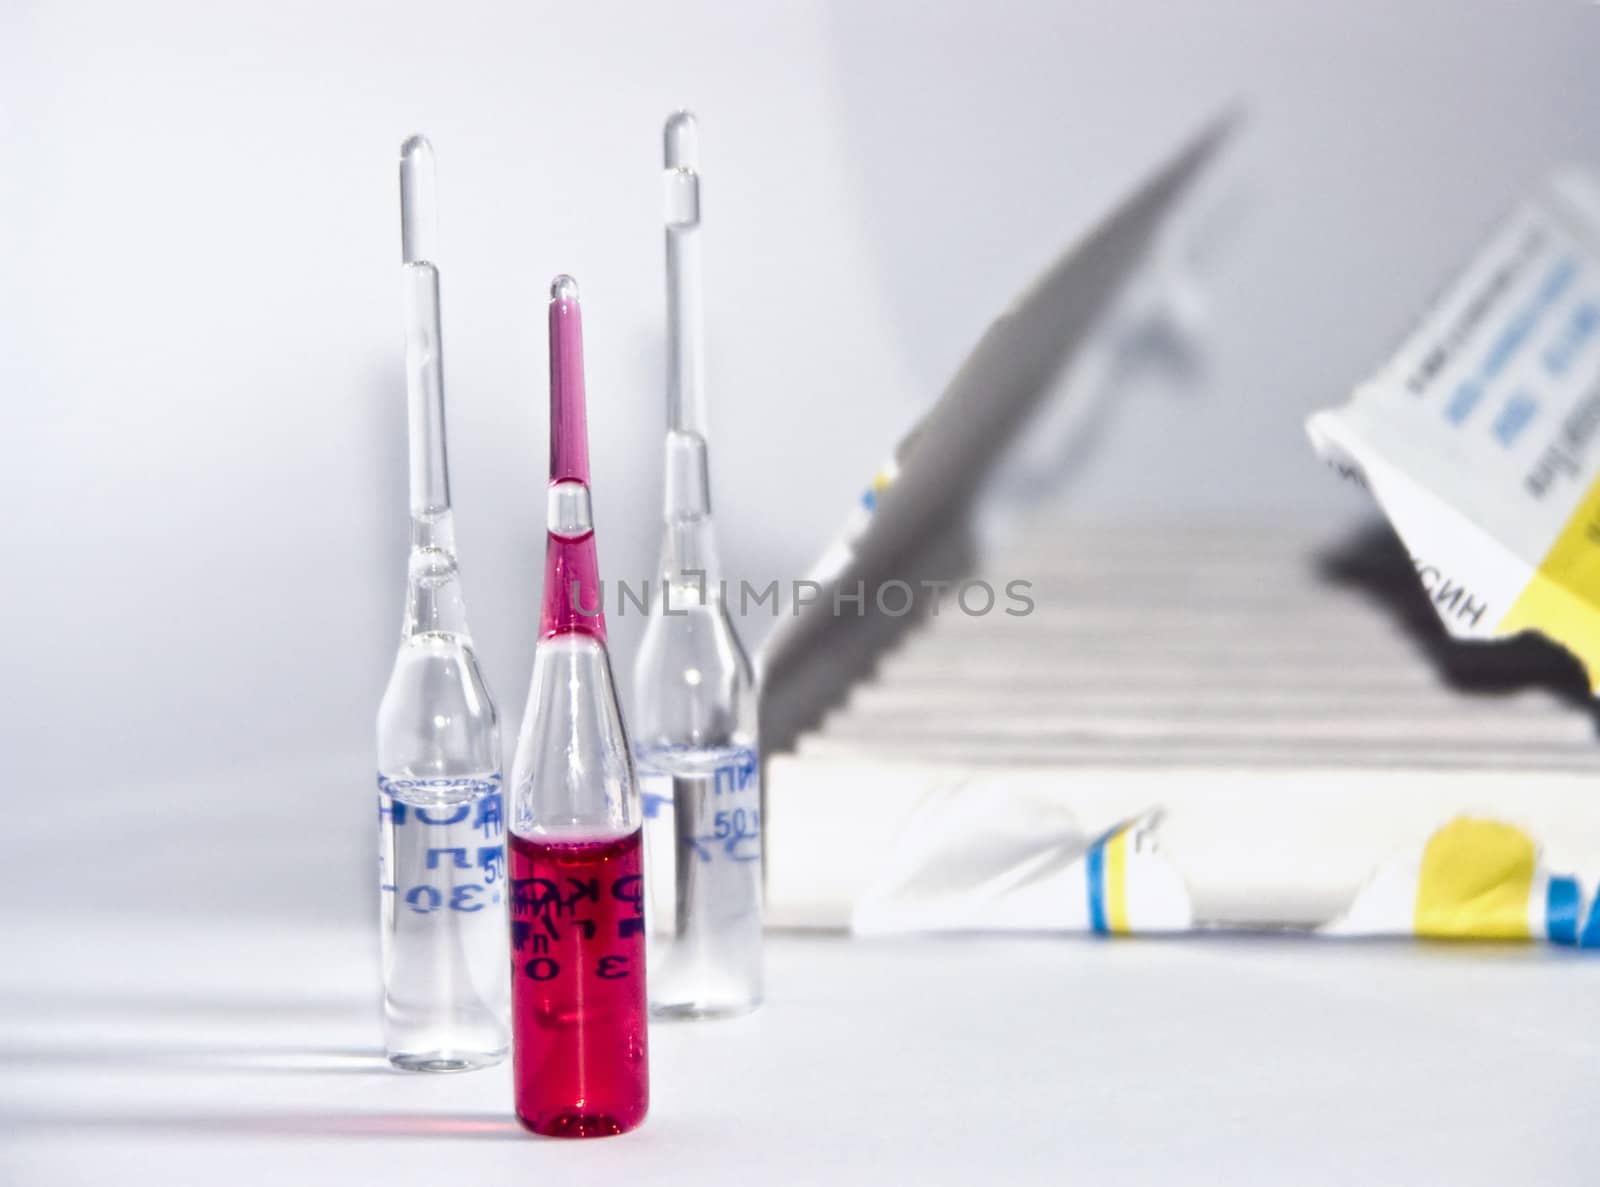 The image of ampoules on a white background